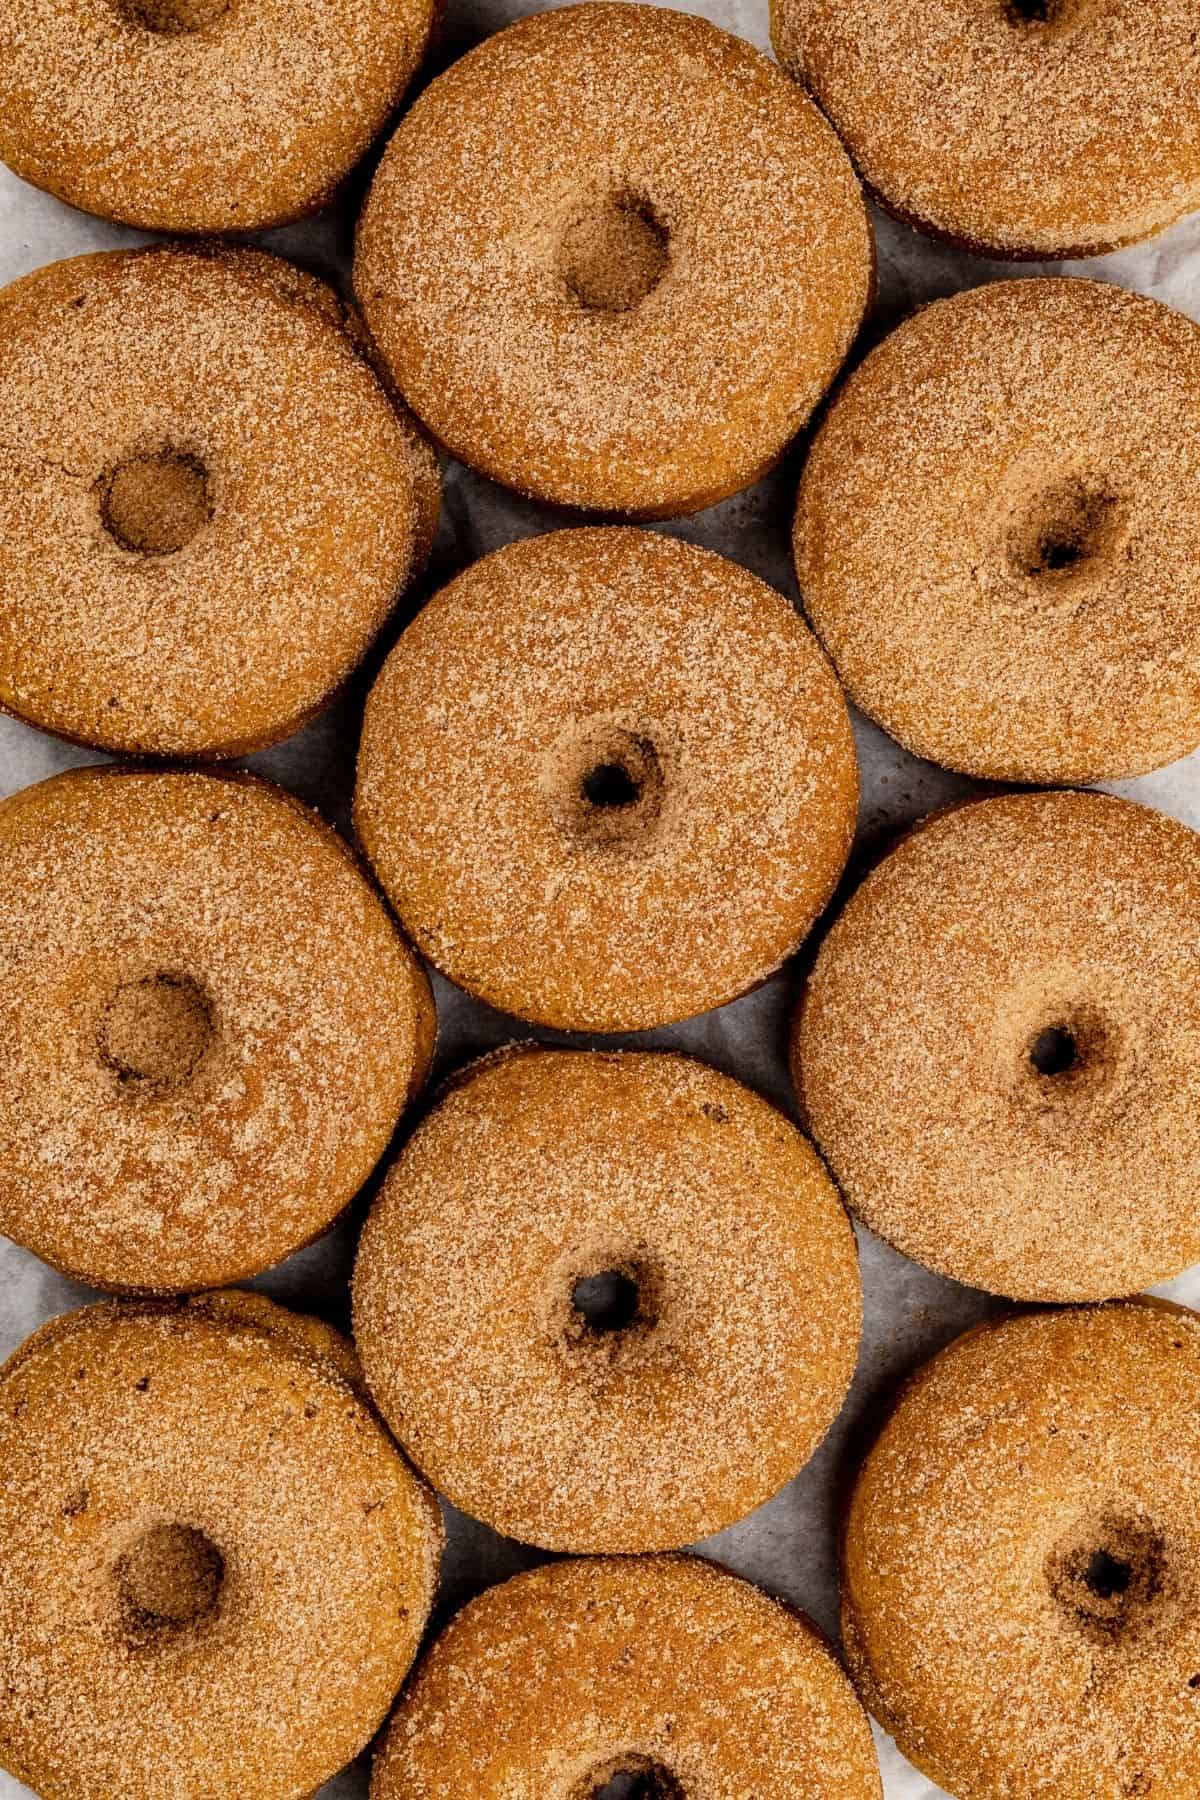 12 finished vegan pumpkin donuts are lined up in rows. they are covered in cinnamon sugar. you can see the white parchment paper they are resting on.